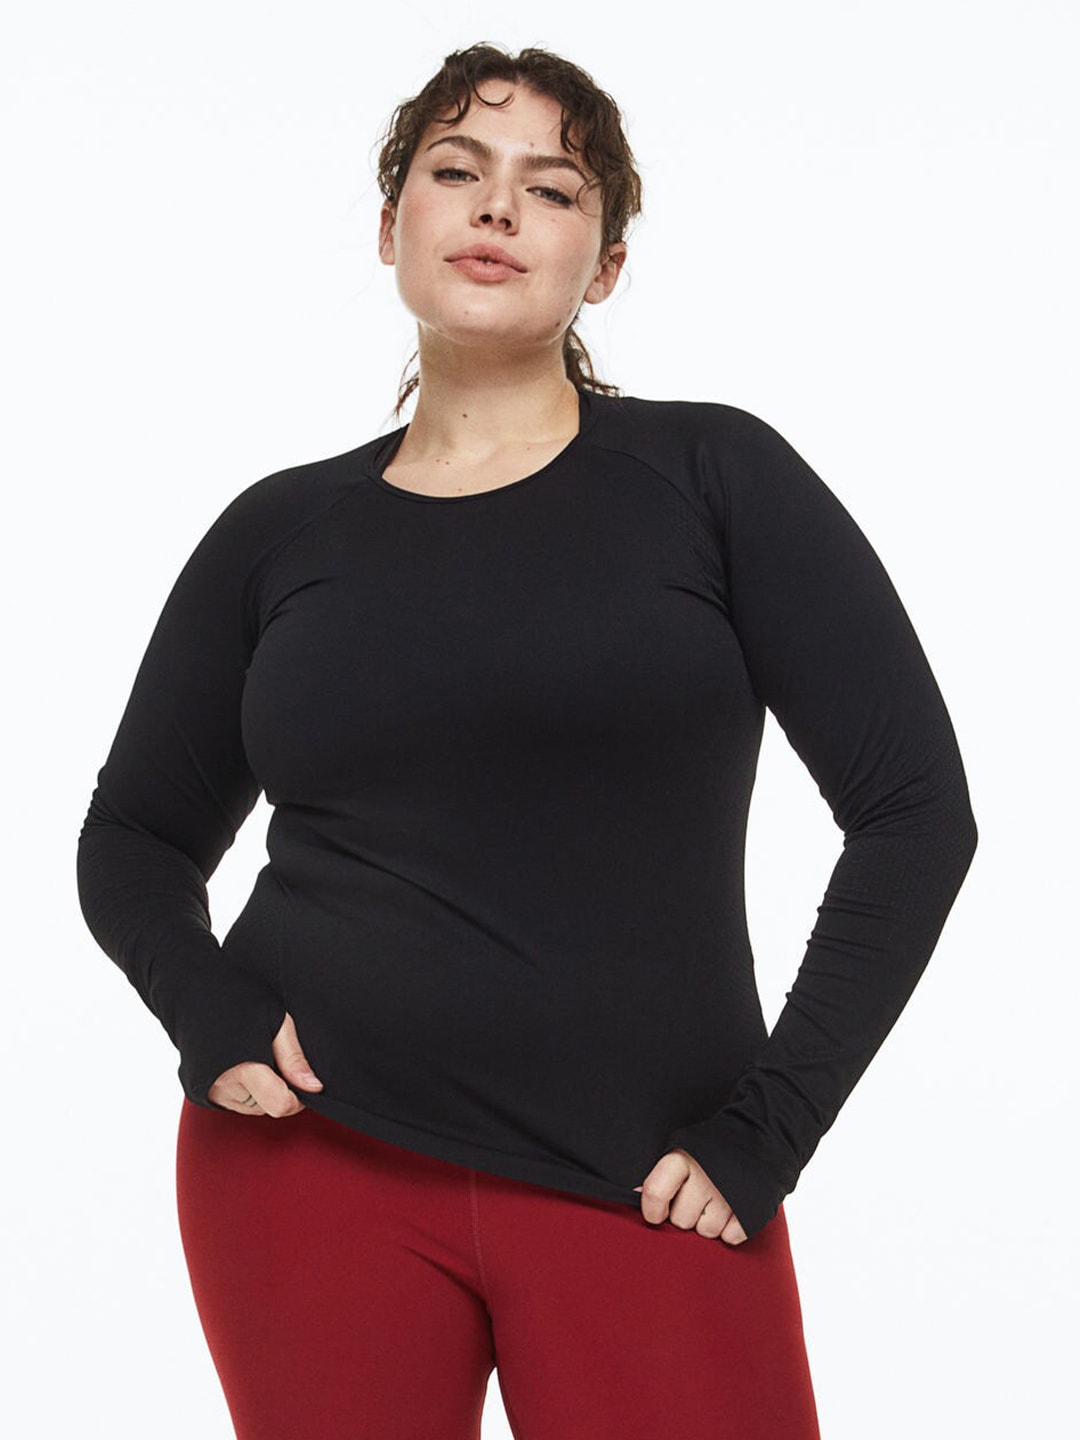 H&M+ Women Plus Size Seamless Sports top Price in India